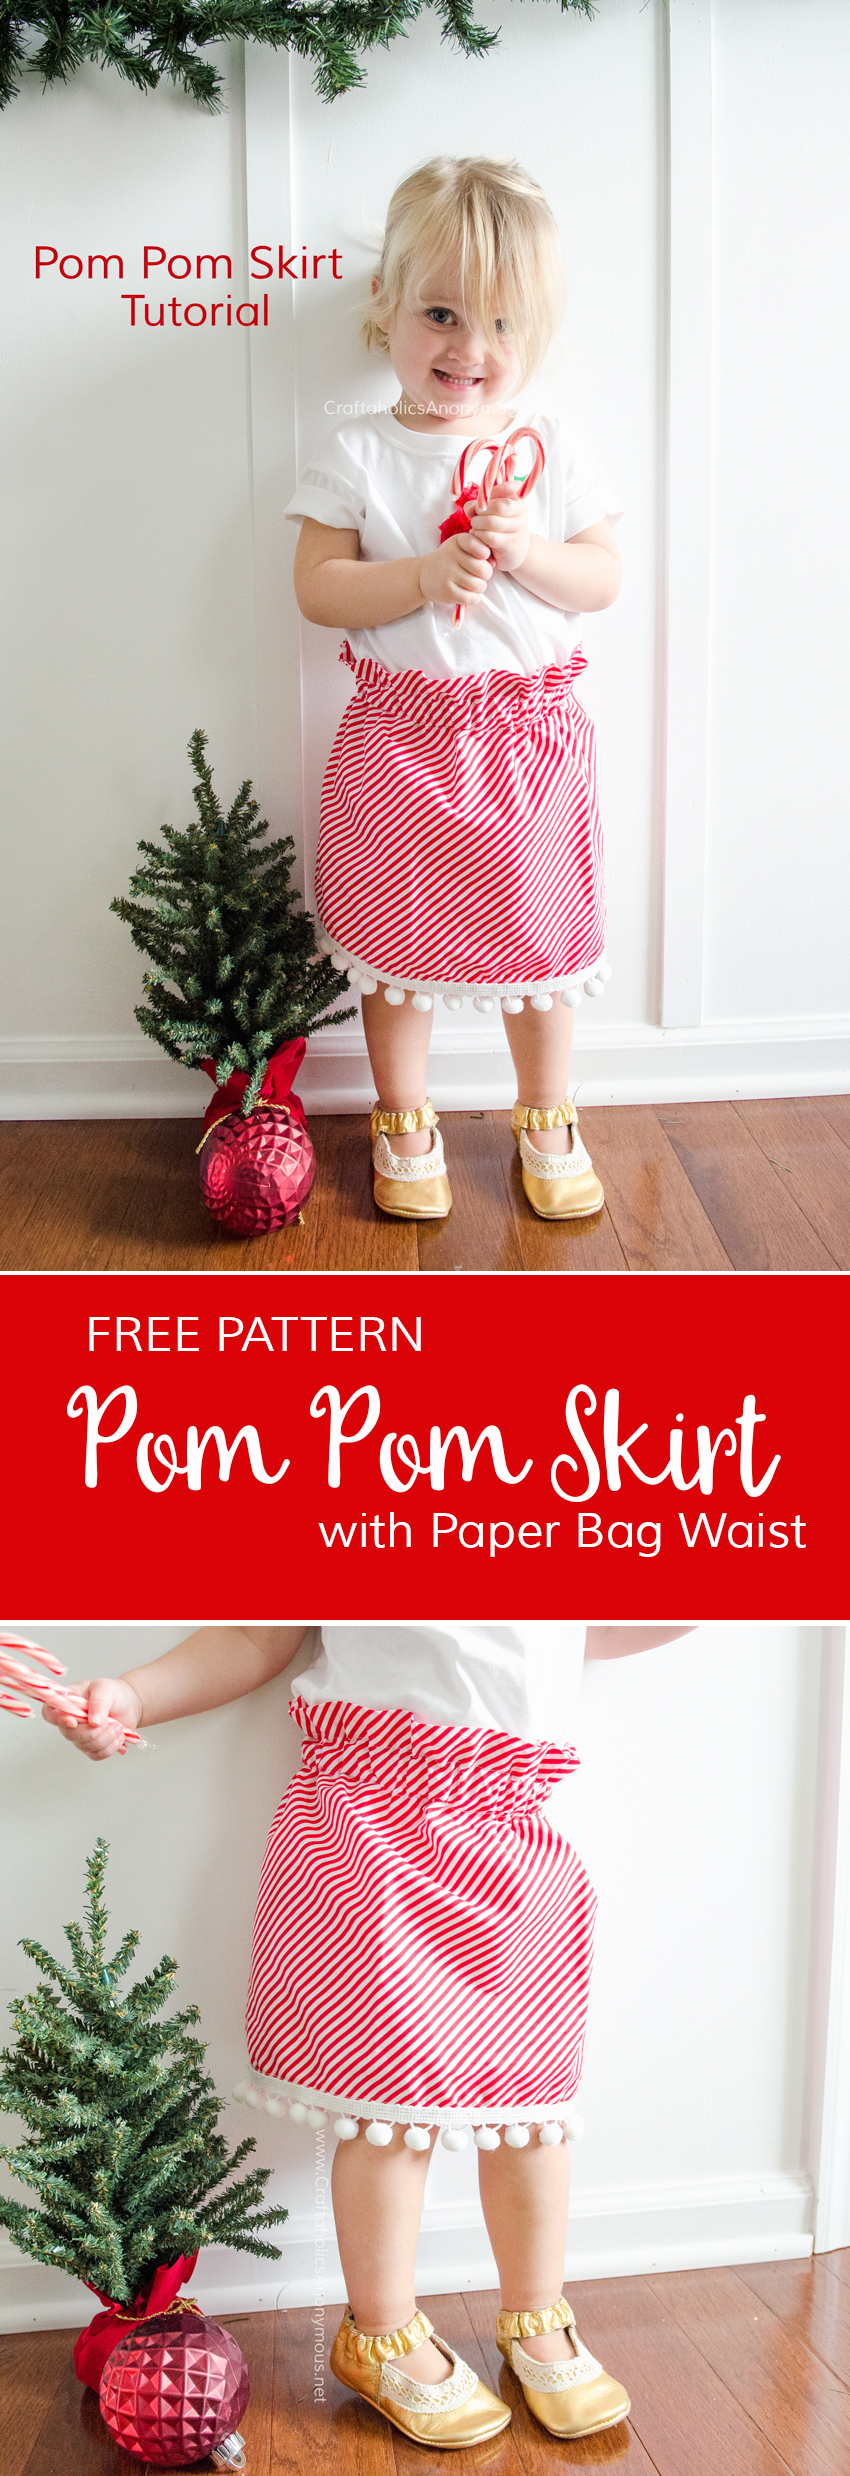 DIY Christmas Skirt tutorial with pom poms and a Paper Bag Waist. Love the details of this simple skirt! Pom Pom Skirt tutorial Free sewing pattern www.CraftaholicsAnonymous.net